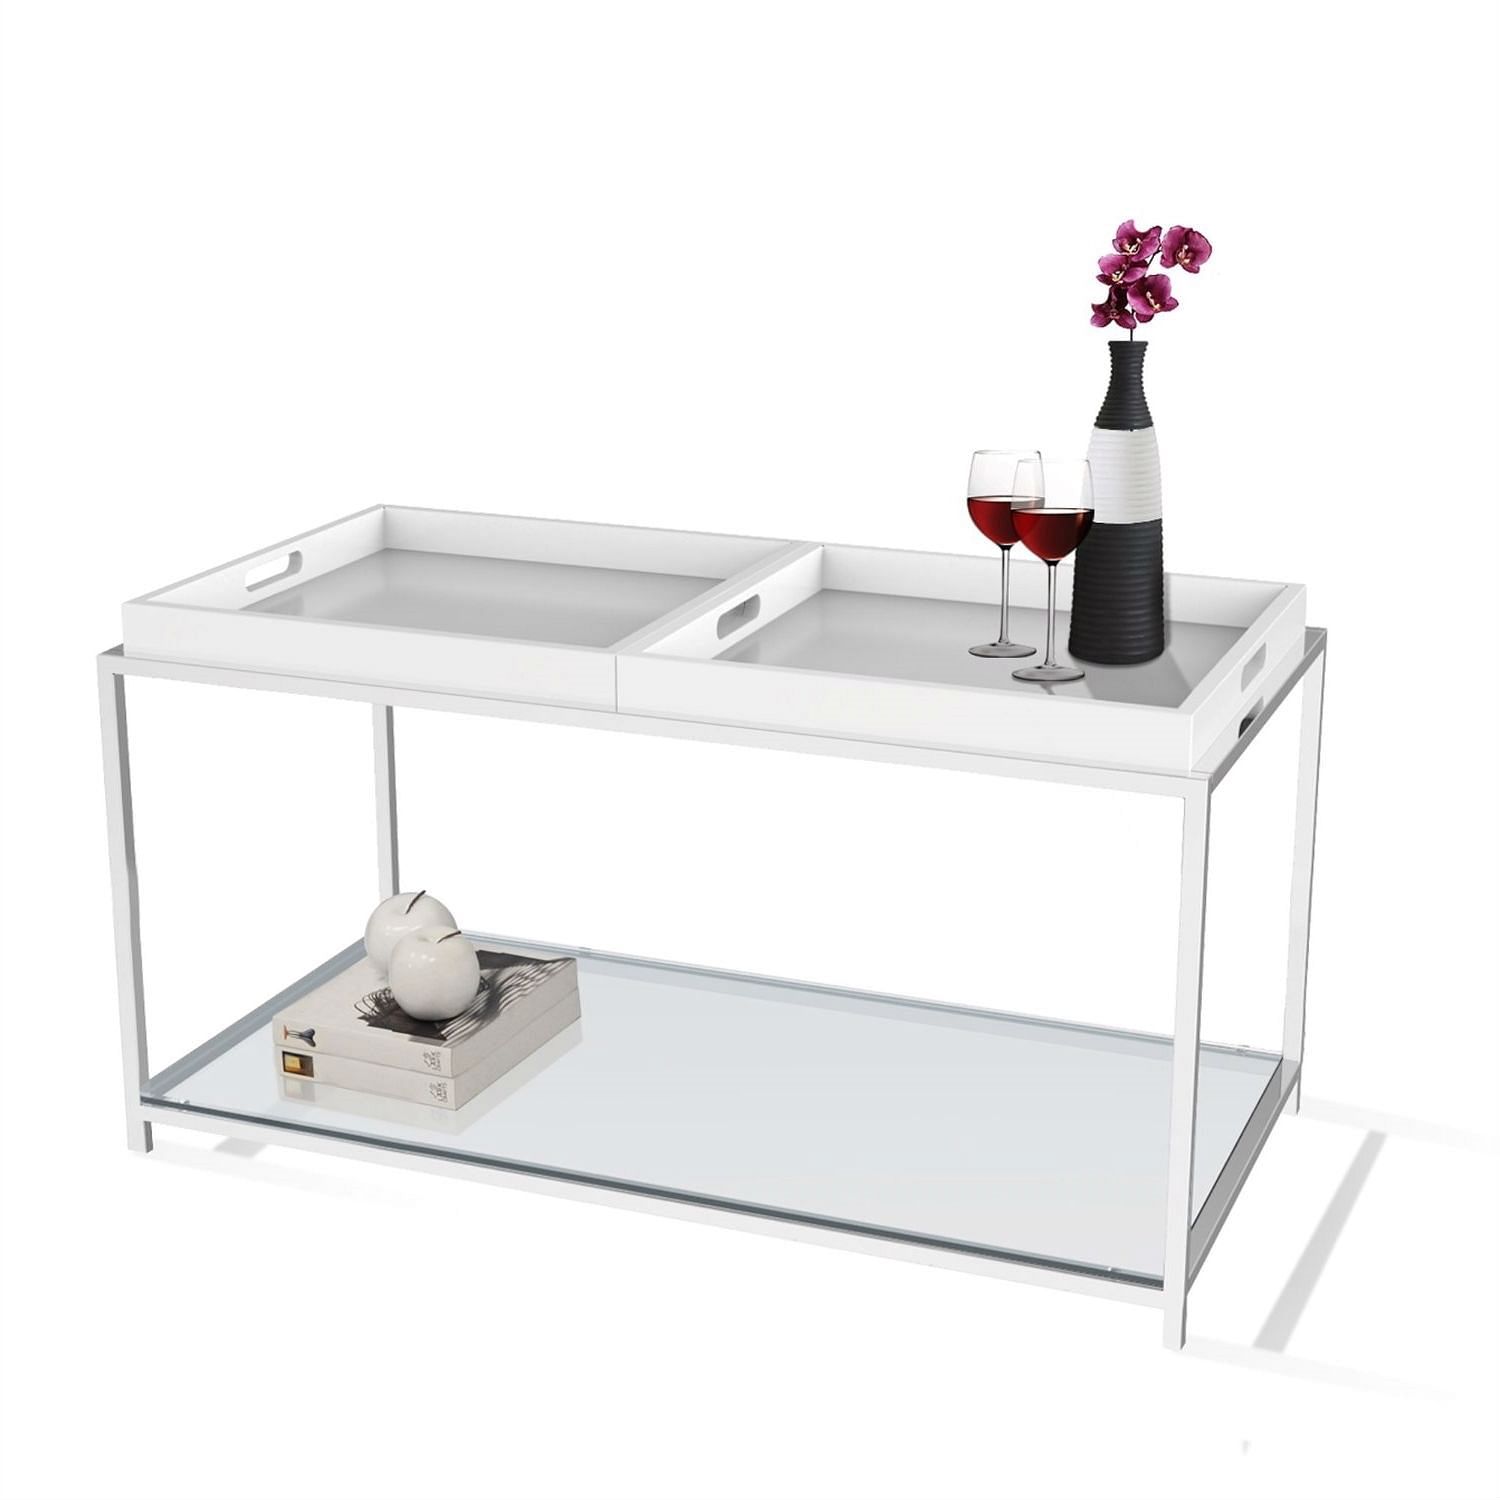 Modern Chrome Metal Coffee Table 2 White Removable Trays With Regard To Detachable Tray Coffee Tables (Gallery 20 of 20)